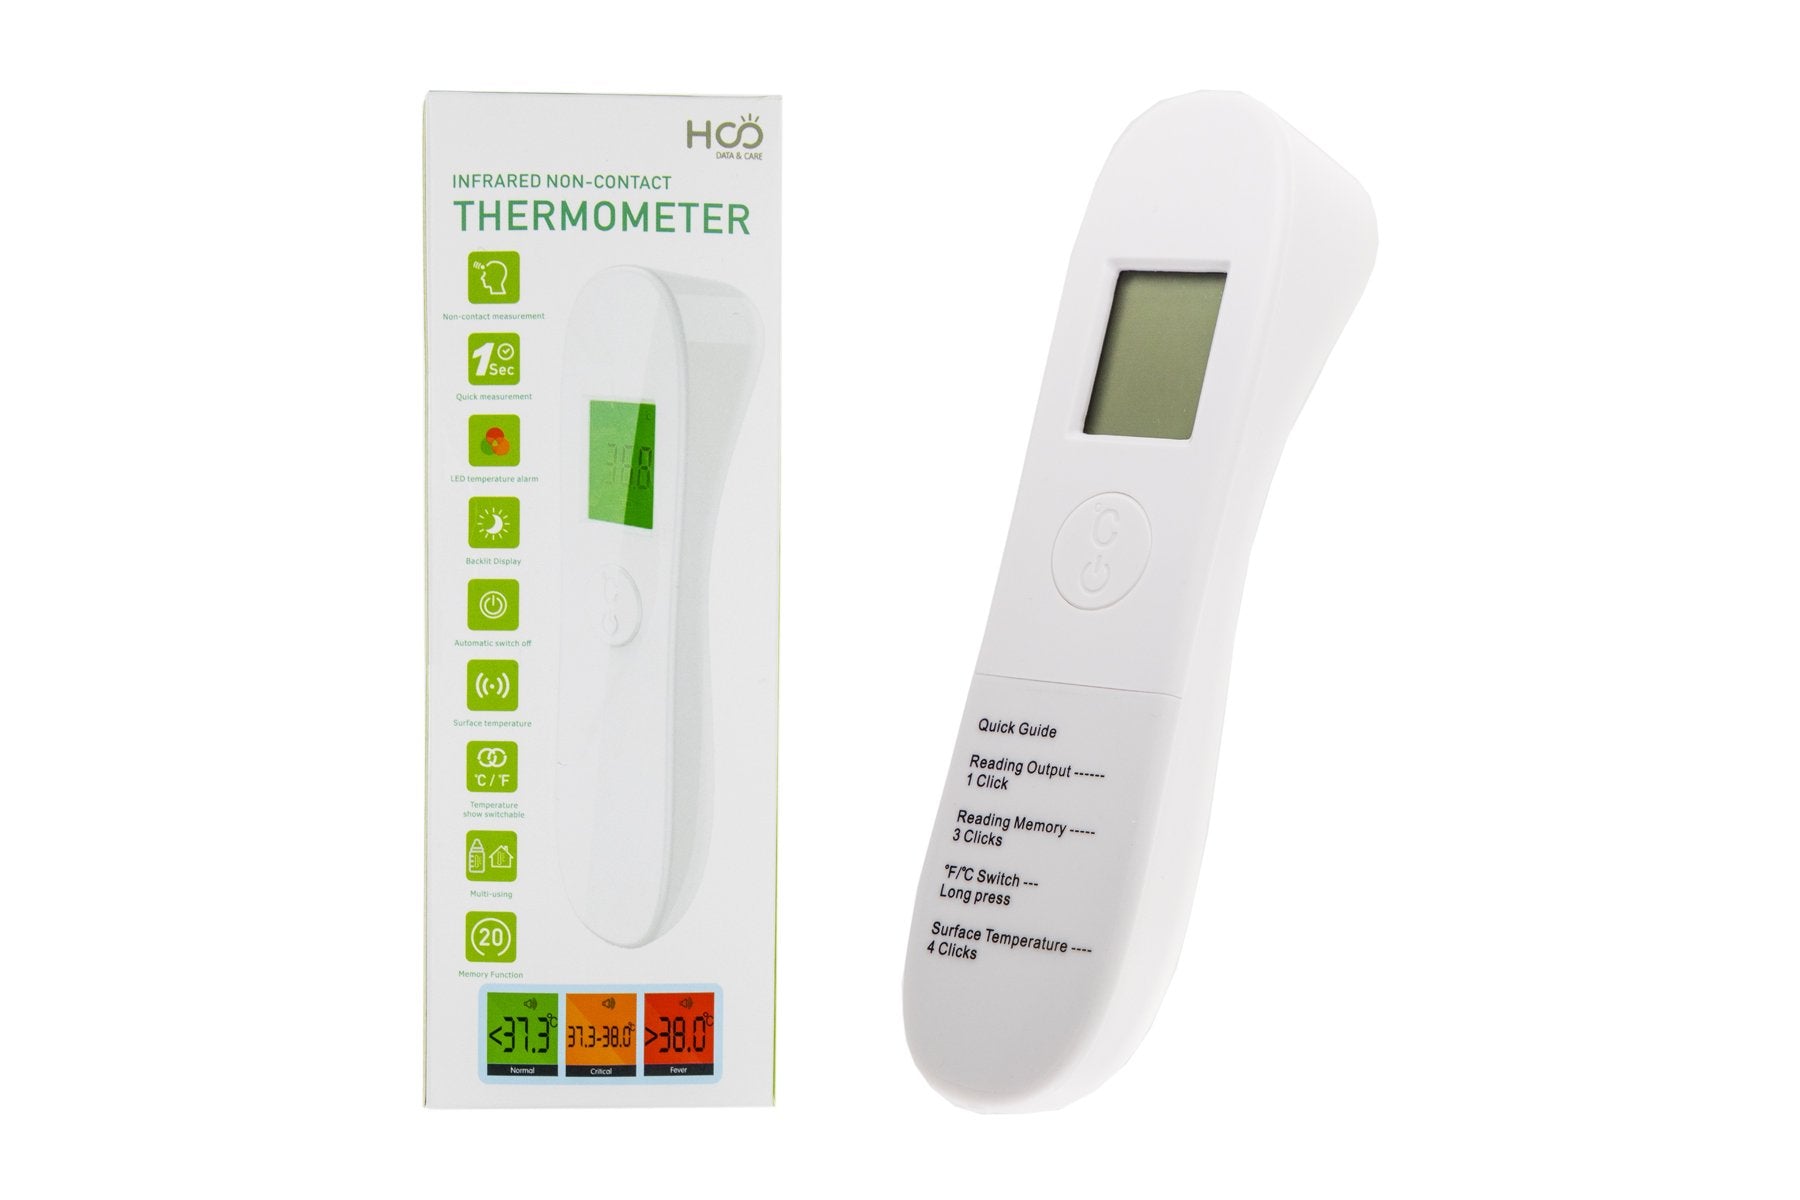 Metene Thermometer for Adults Forehead, Infrared Digital Thermometer